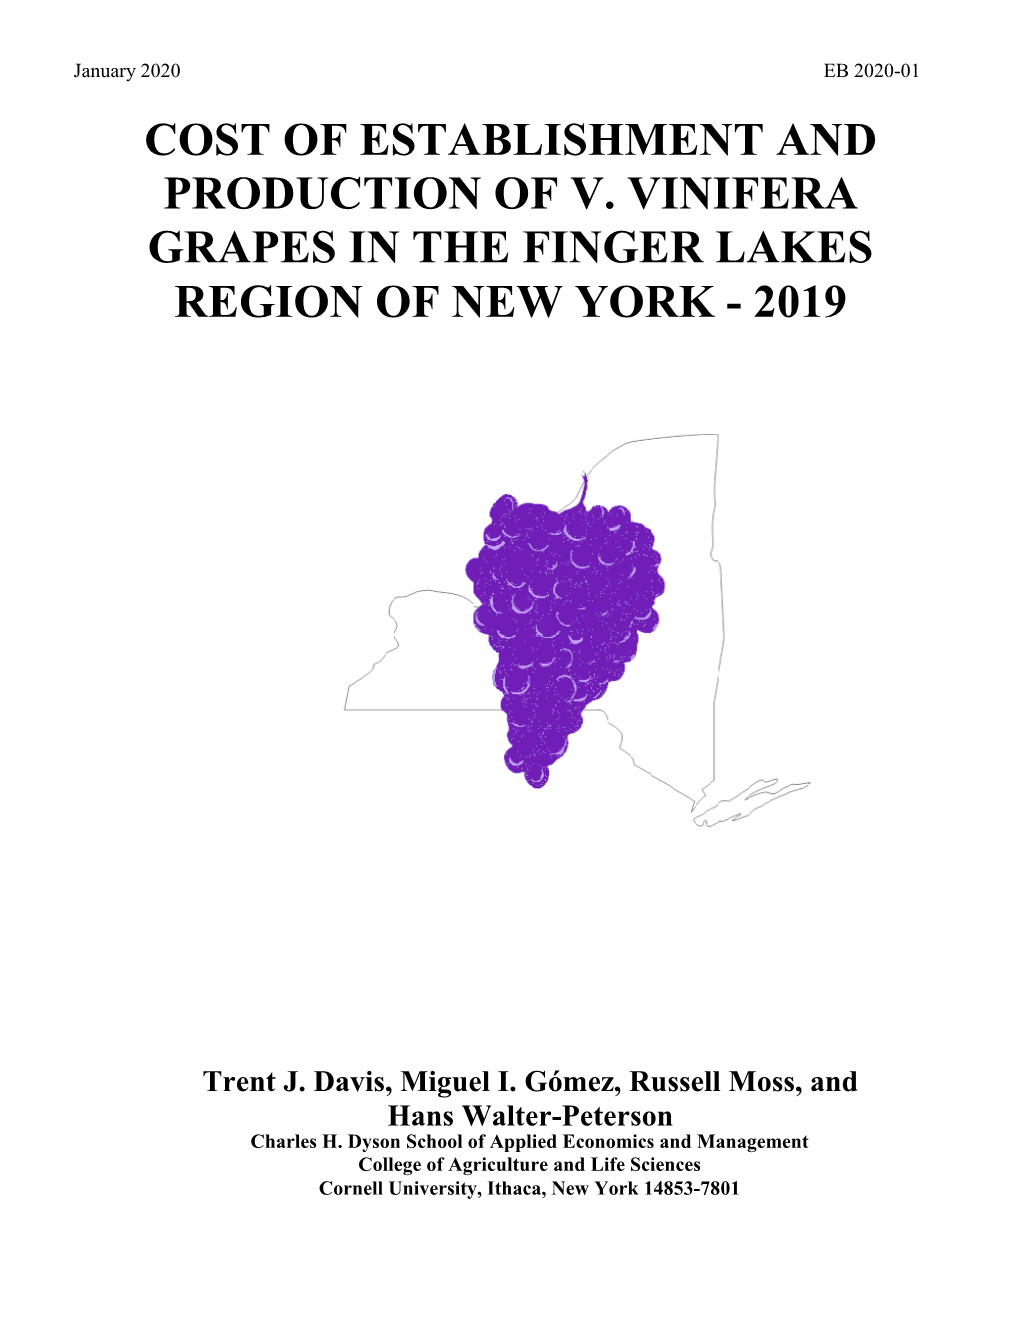 Cost of Establishment and Production of V. Vinifera Grapes in the Finger Lakes Region of New York, 2019